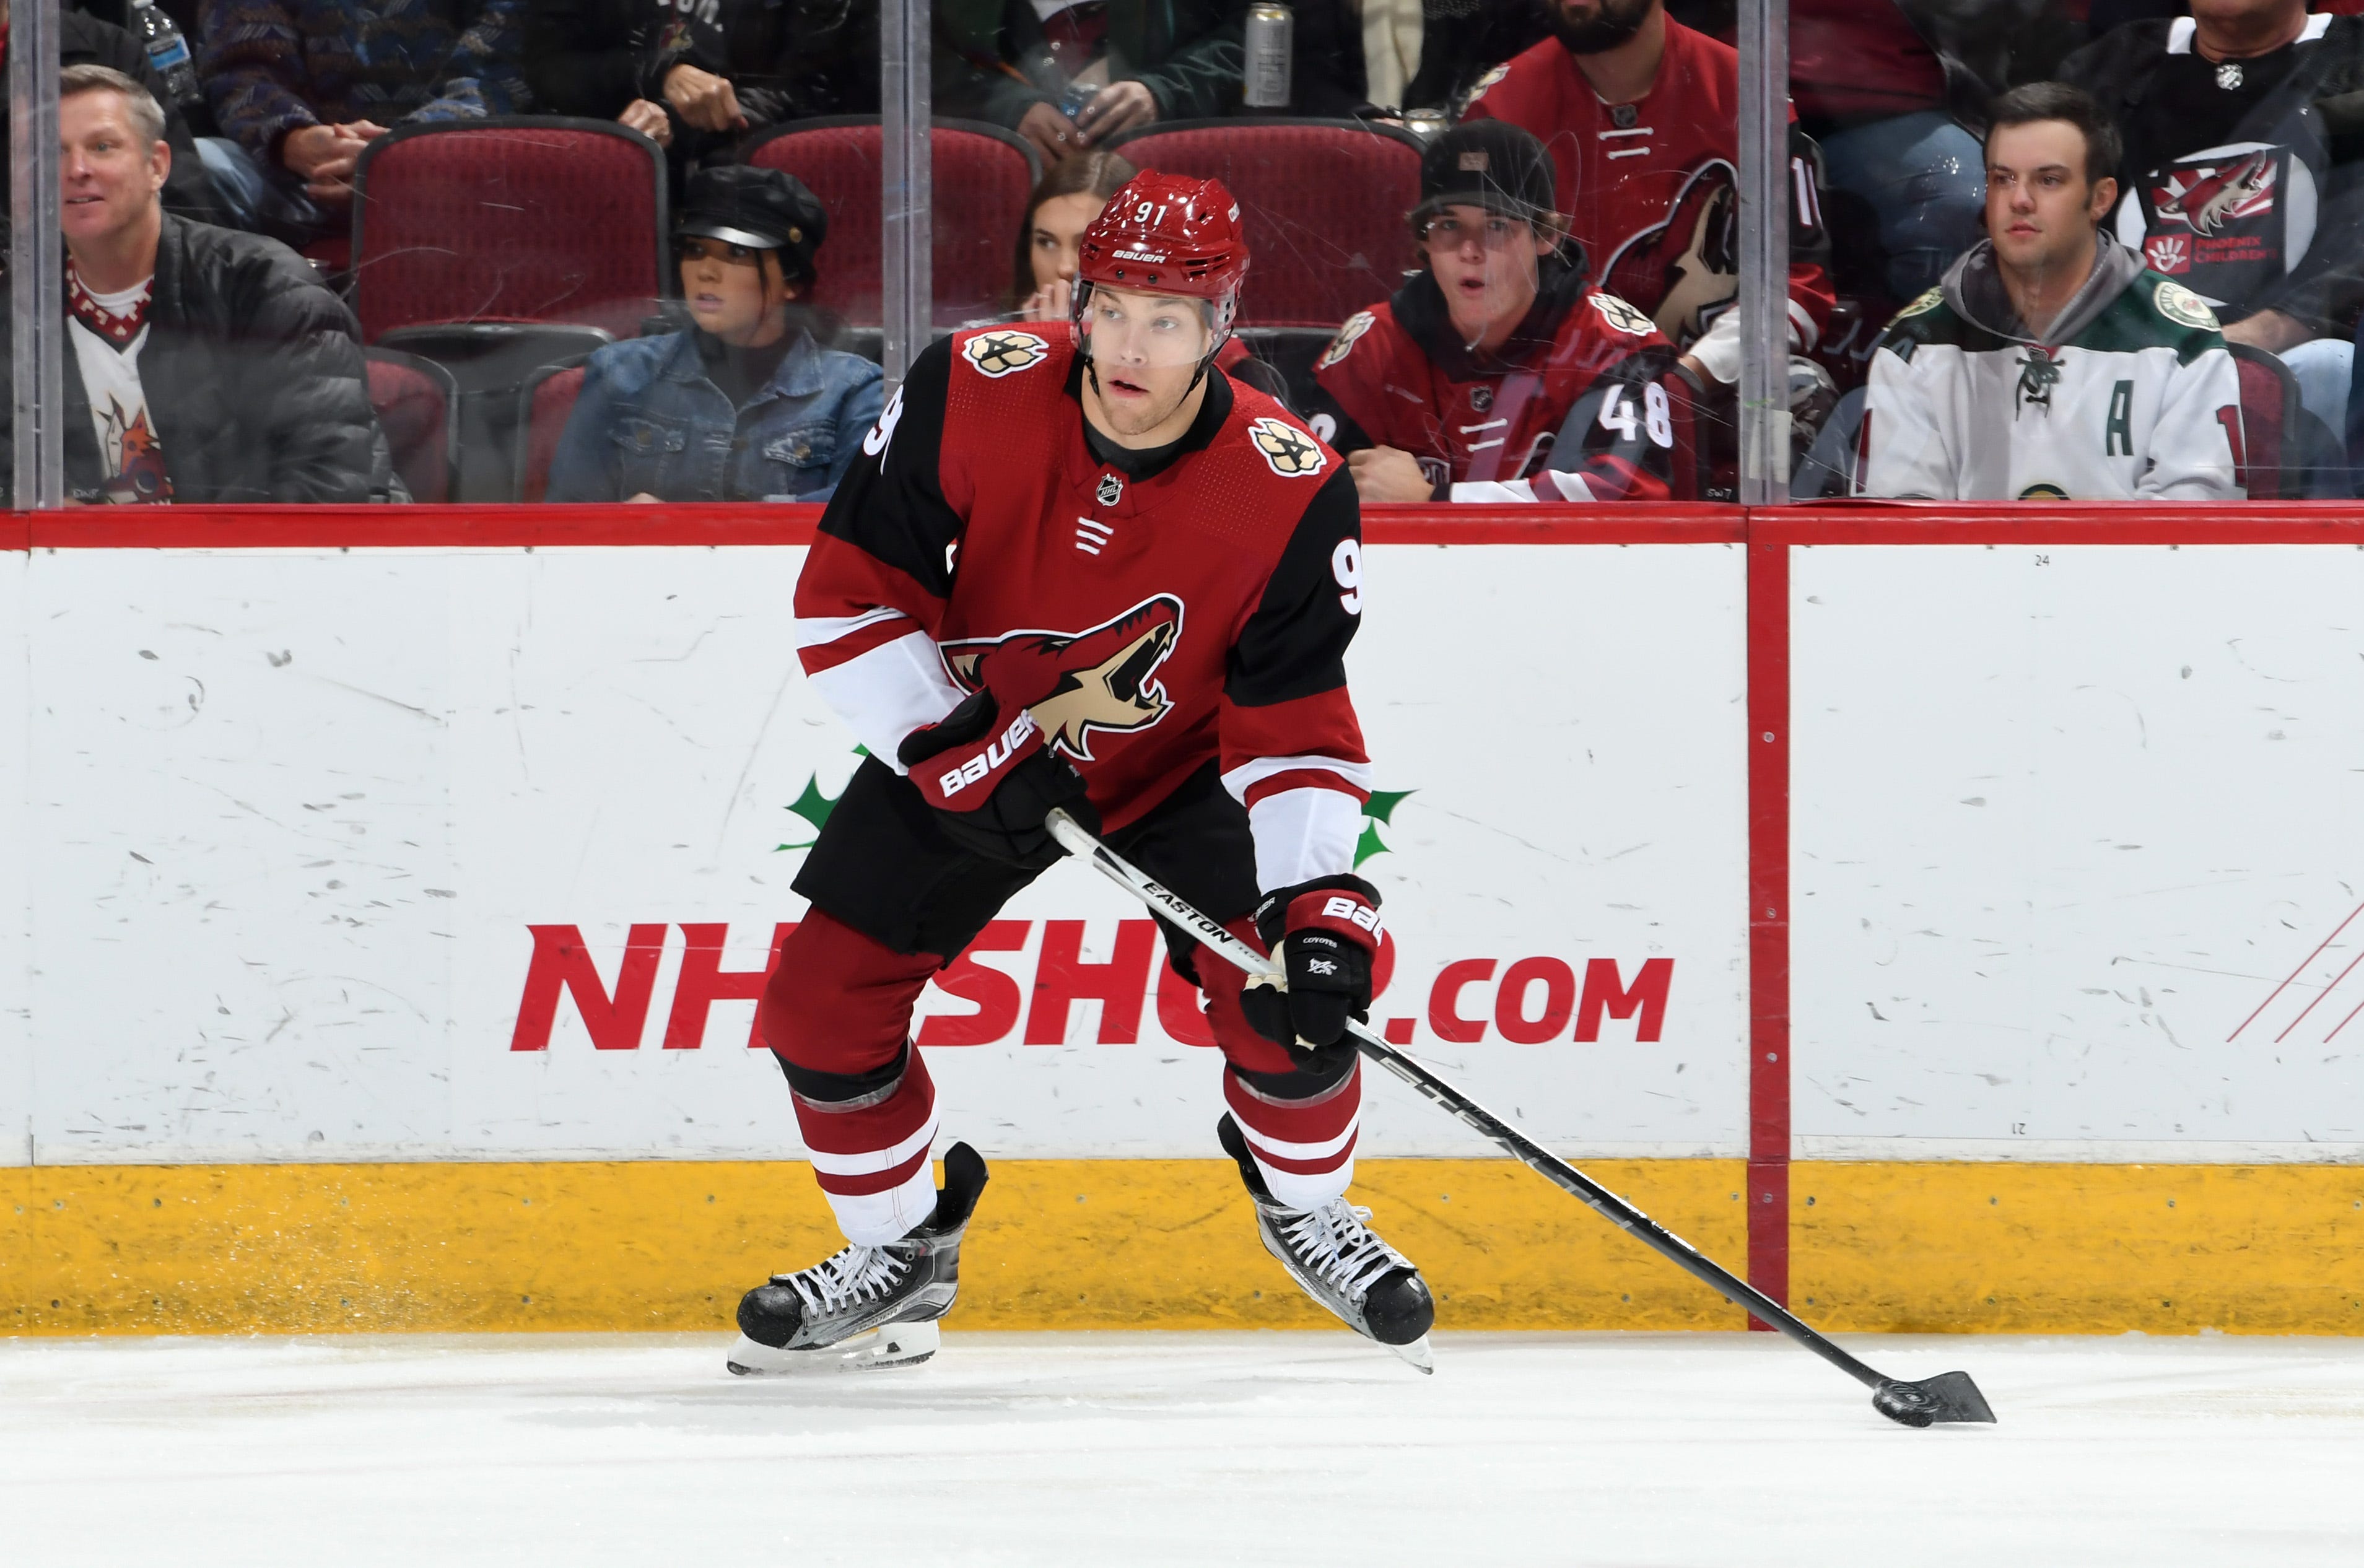 Taylor Hall, new Coyotes GM didn't speak before Hall signed with